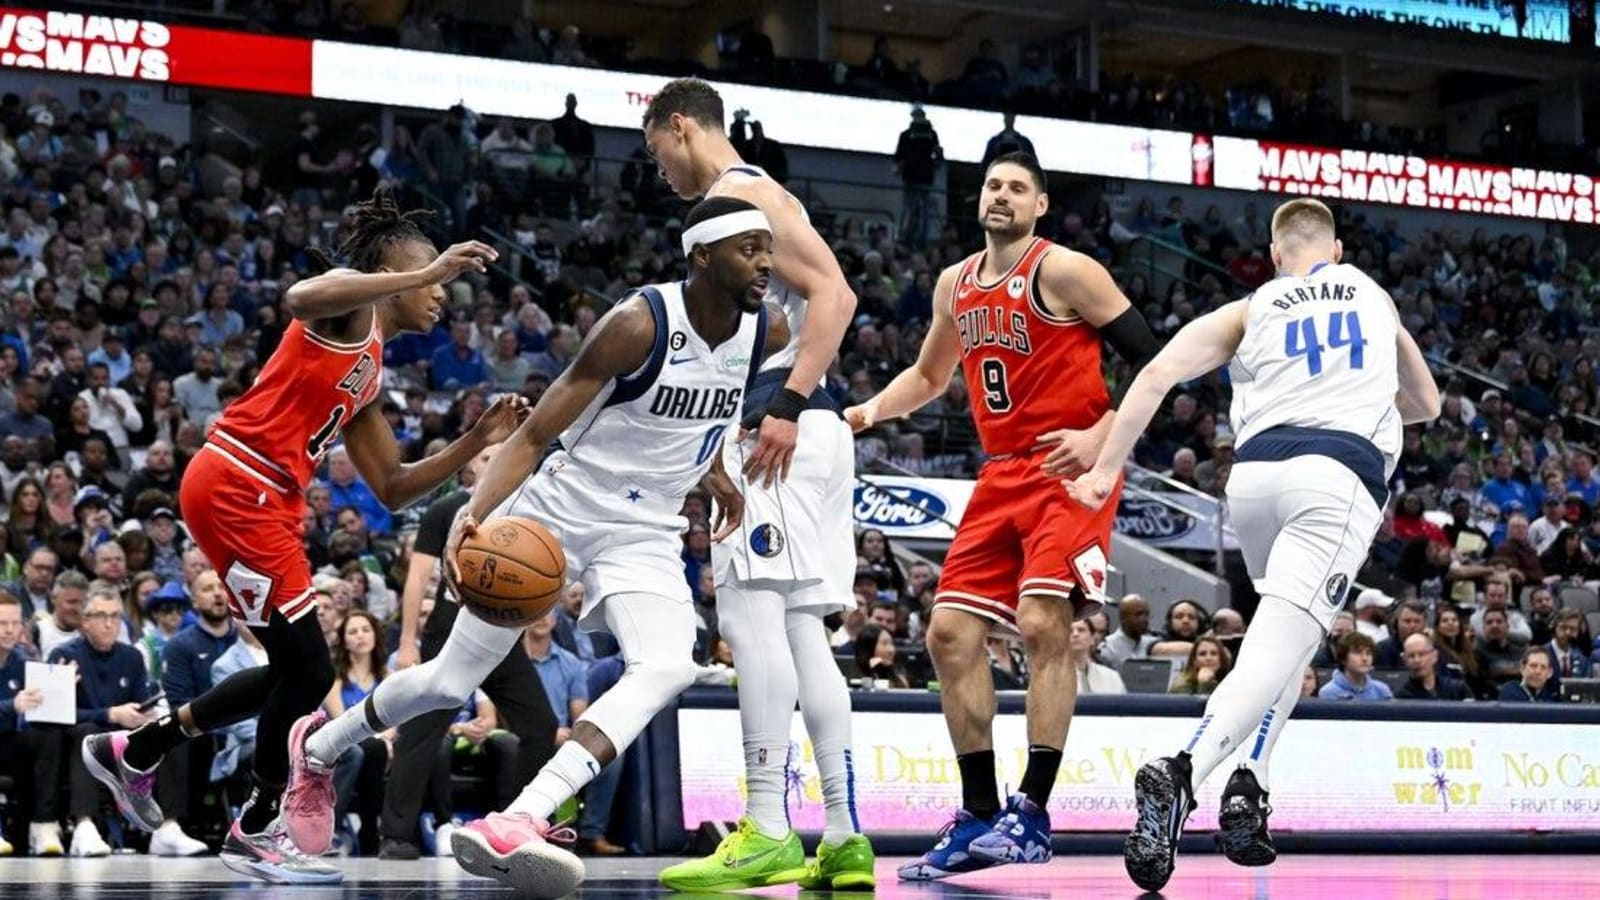 Short-handed Mavs eliminated with loss to Bulls